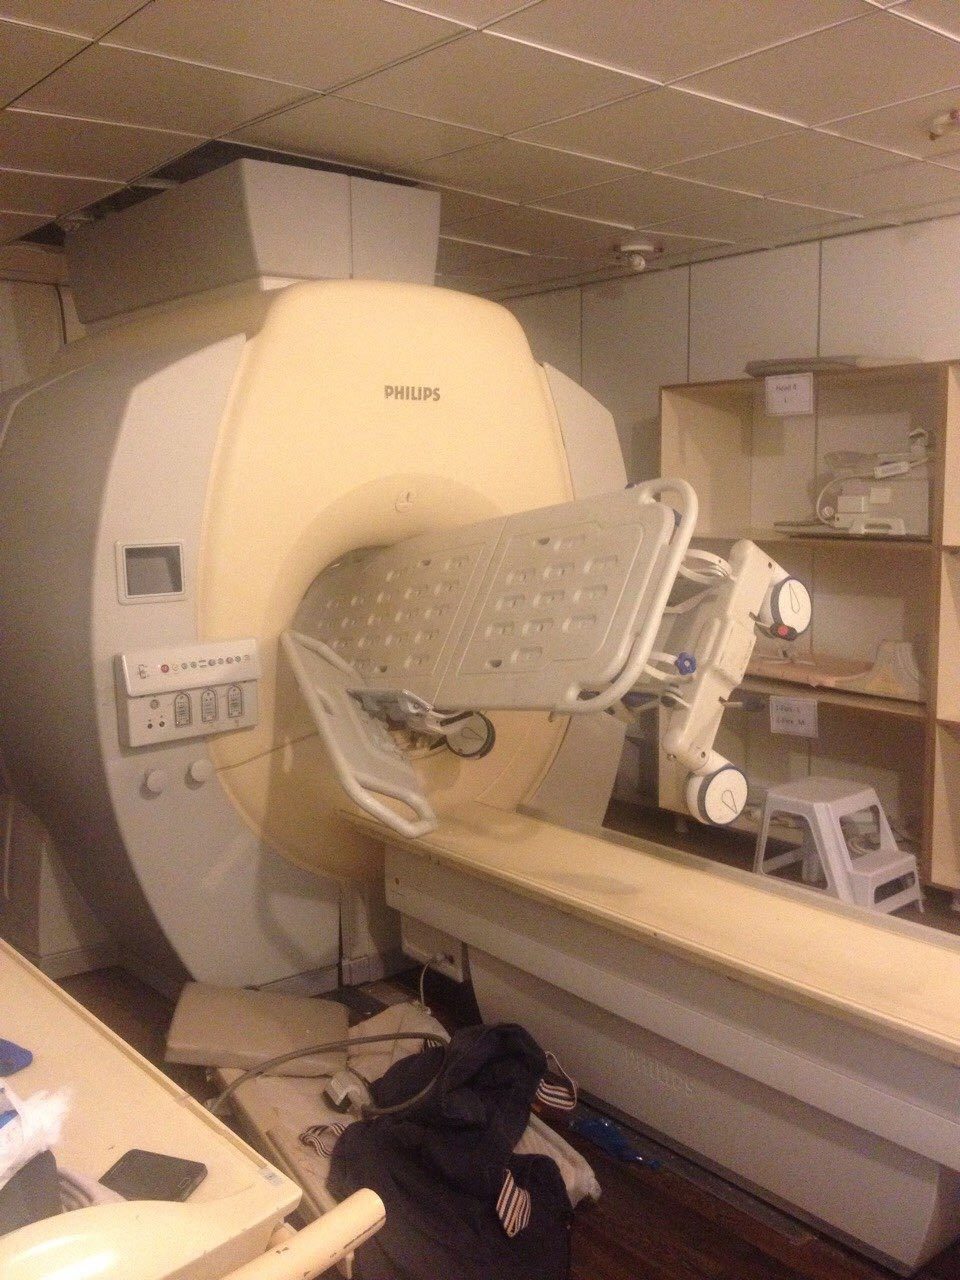 The repair cost 150 thousand euros - My, Rustograph, Tomography, MRI, Philips, The medicine, My